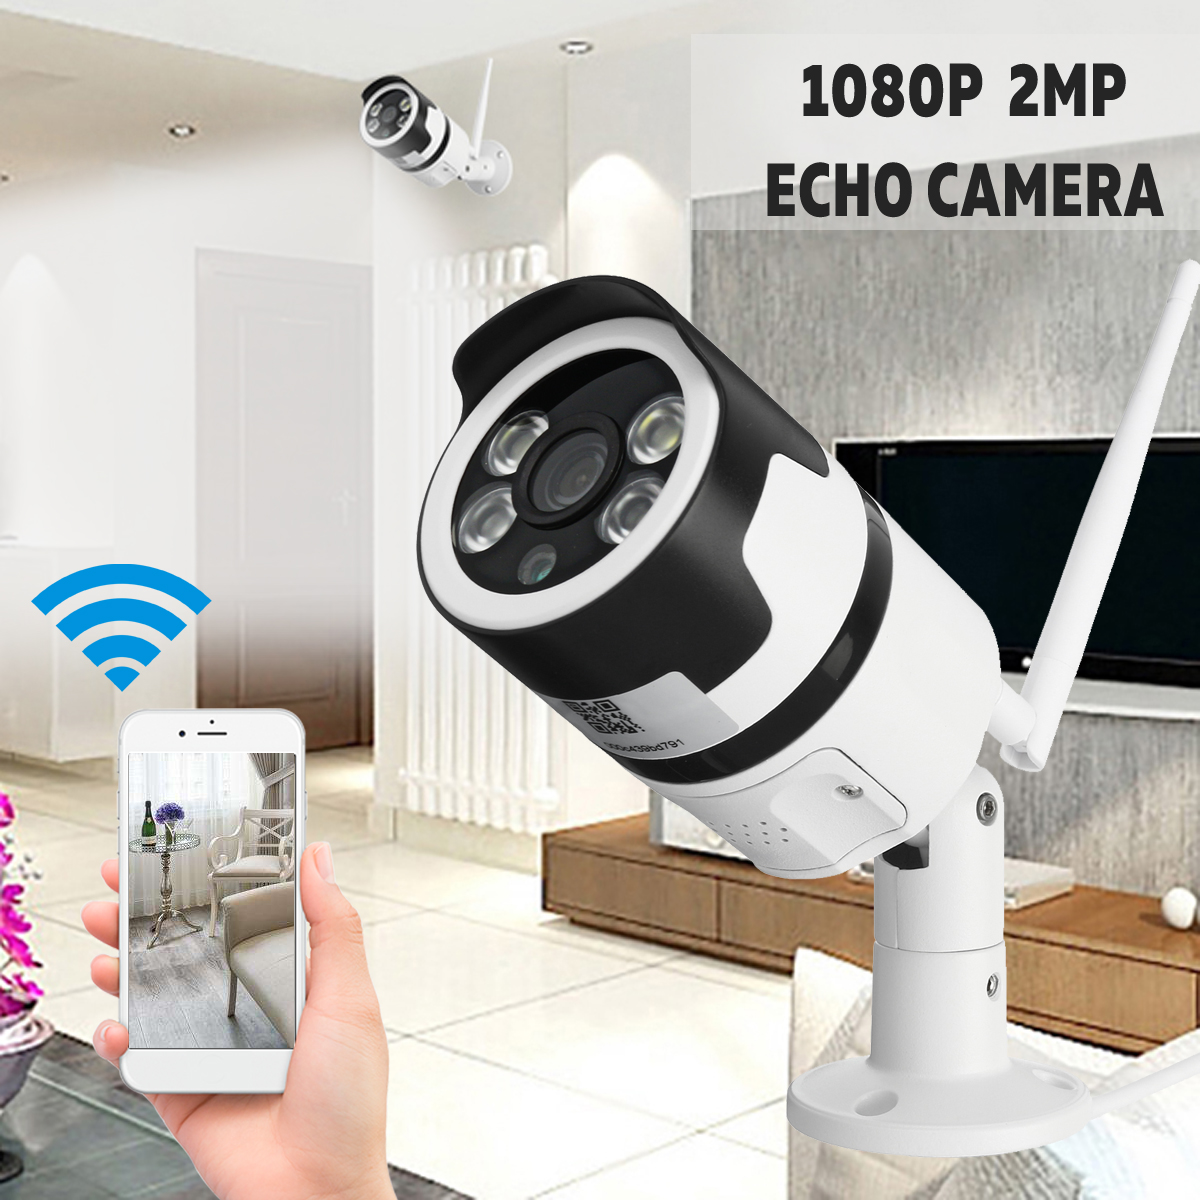 1080P 2MP WiFi Home Security IP Camera Motion Detection Night Vision For Alexa Echo 10